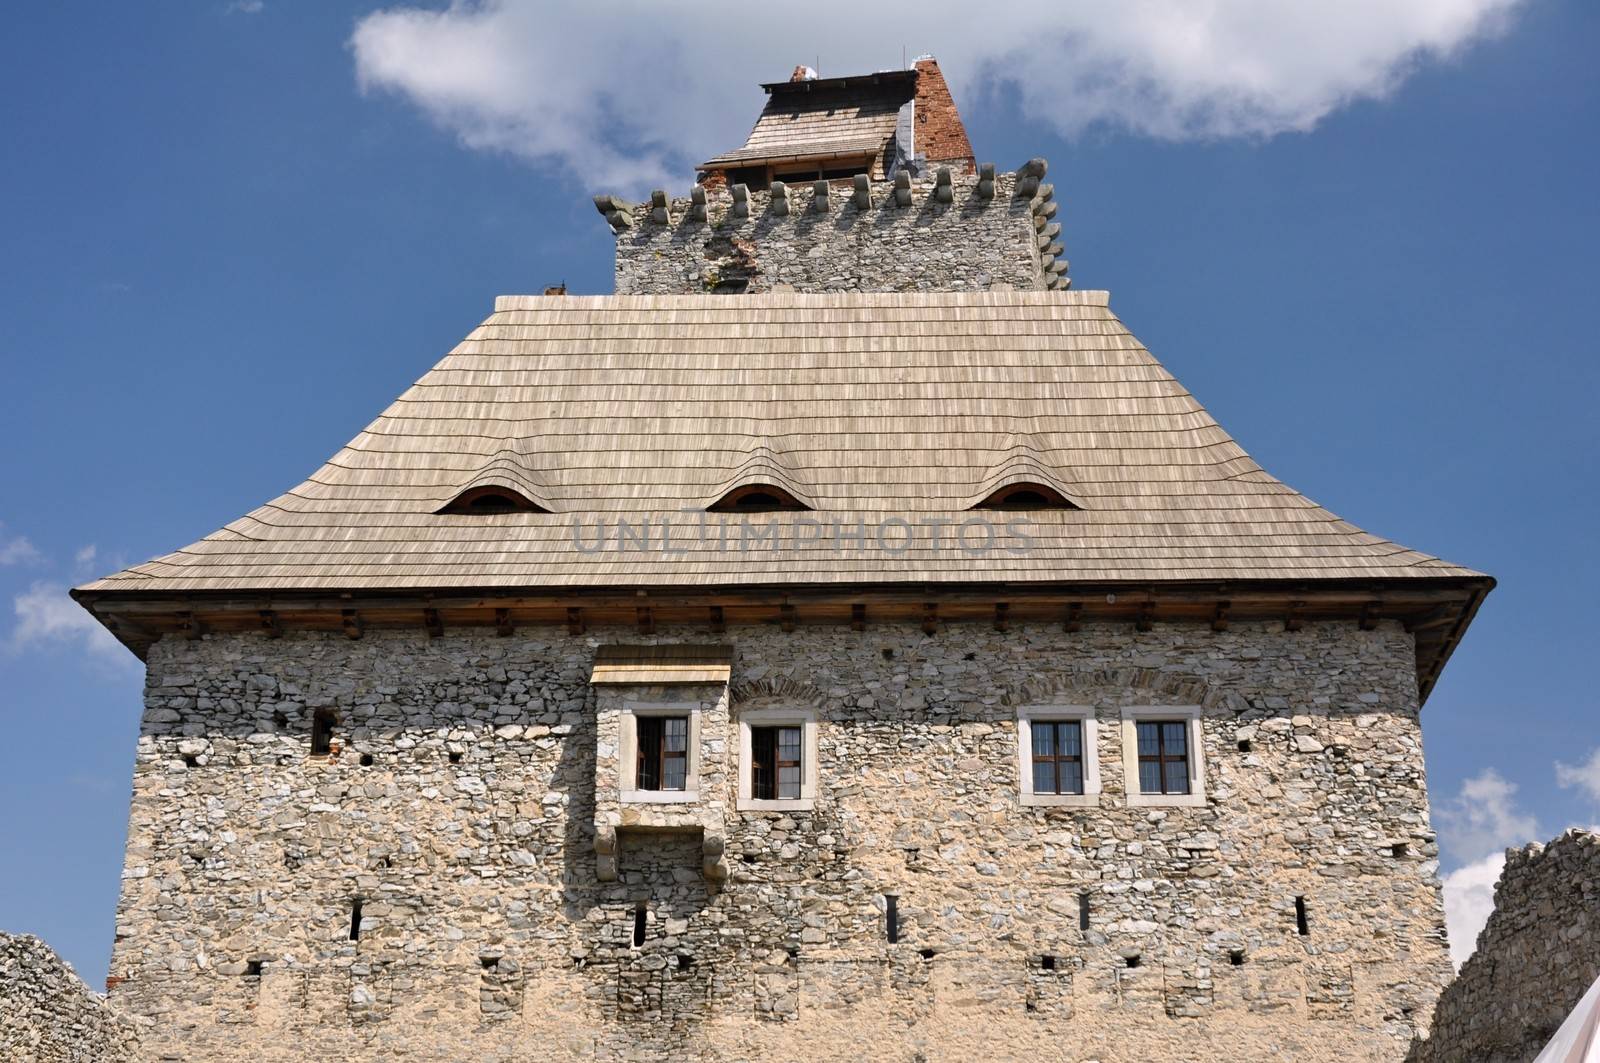 Part of an old castle with a new roof